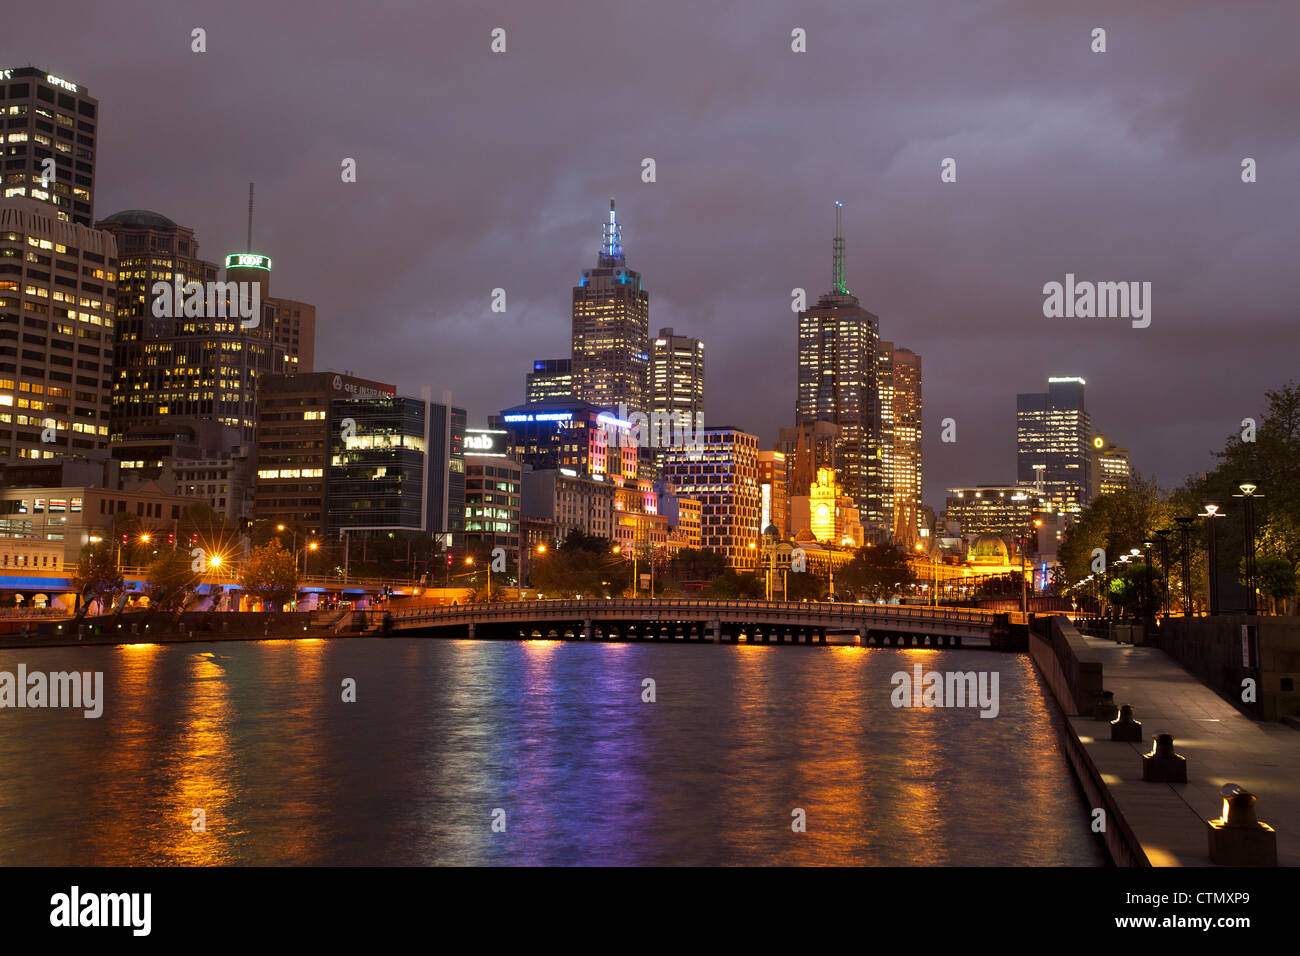 Melbourne Australia Southbank cityscape skyline at night, cit lights, view across the Yarra River showing queenbridge street Stock Photo